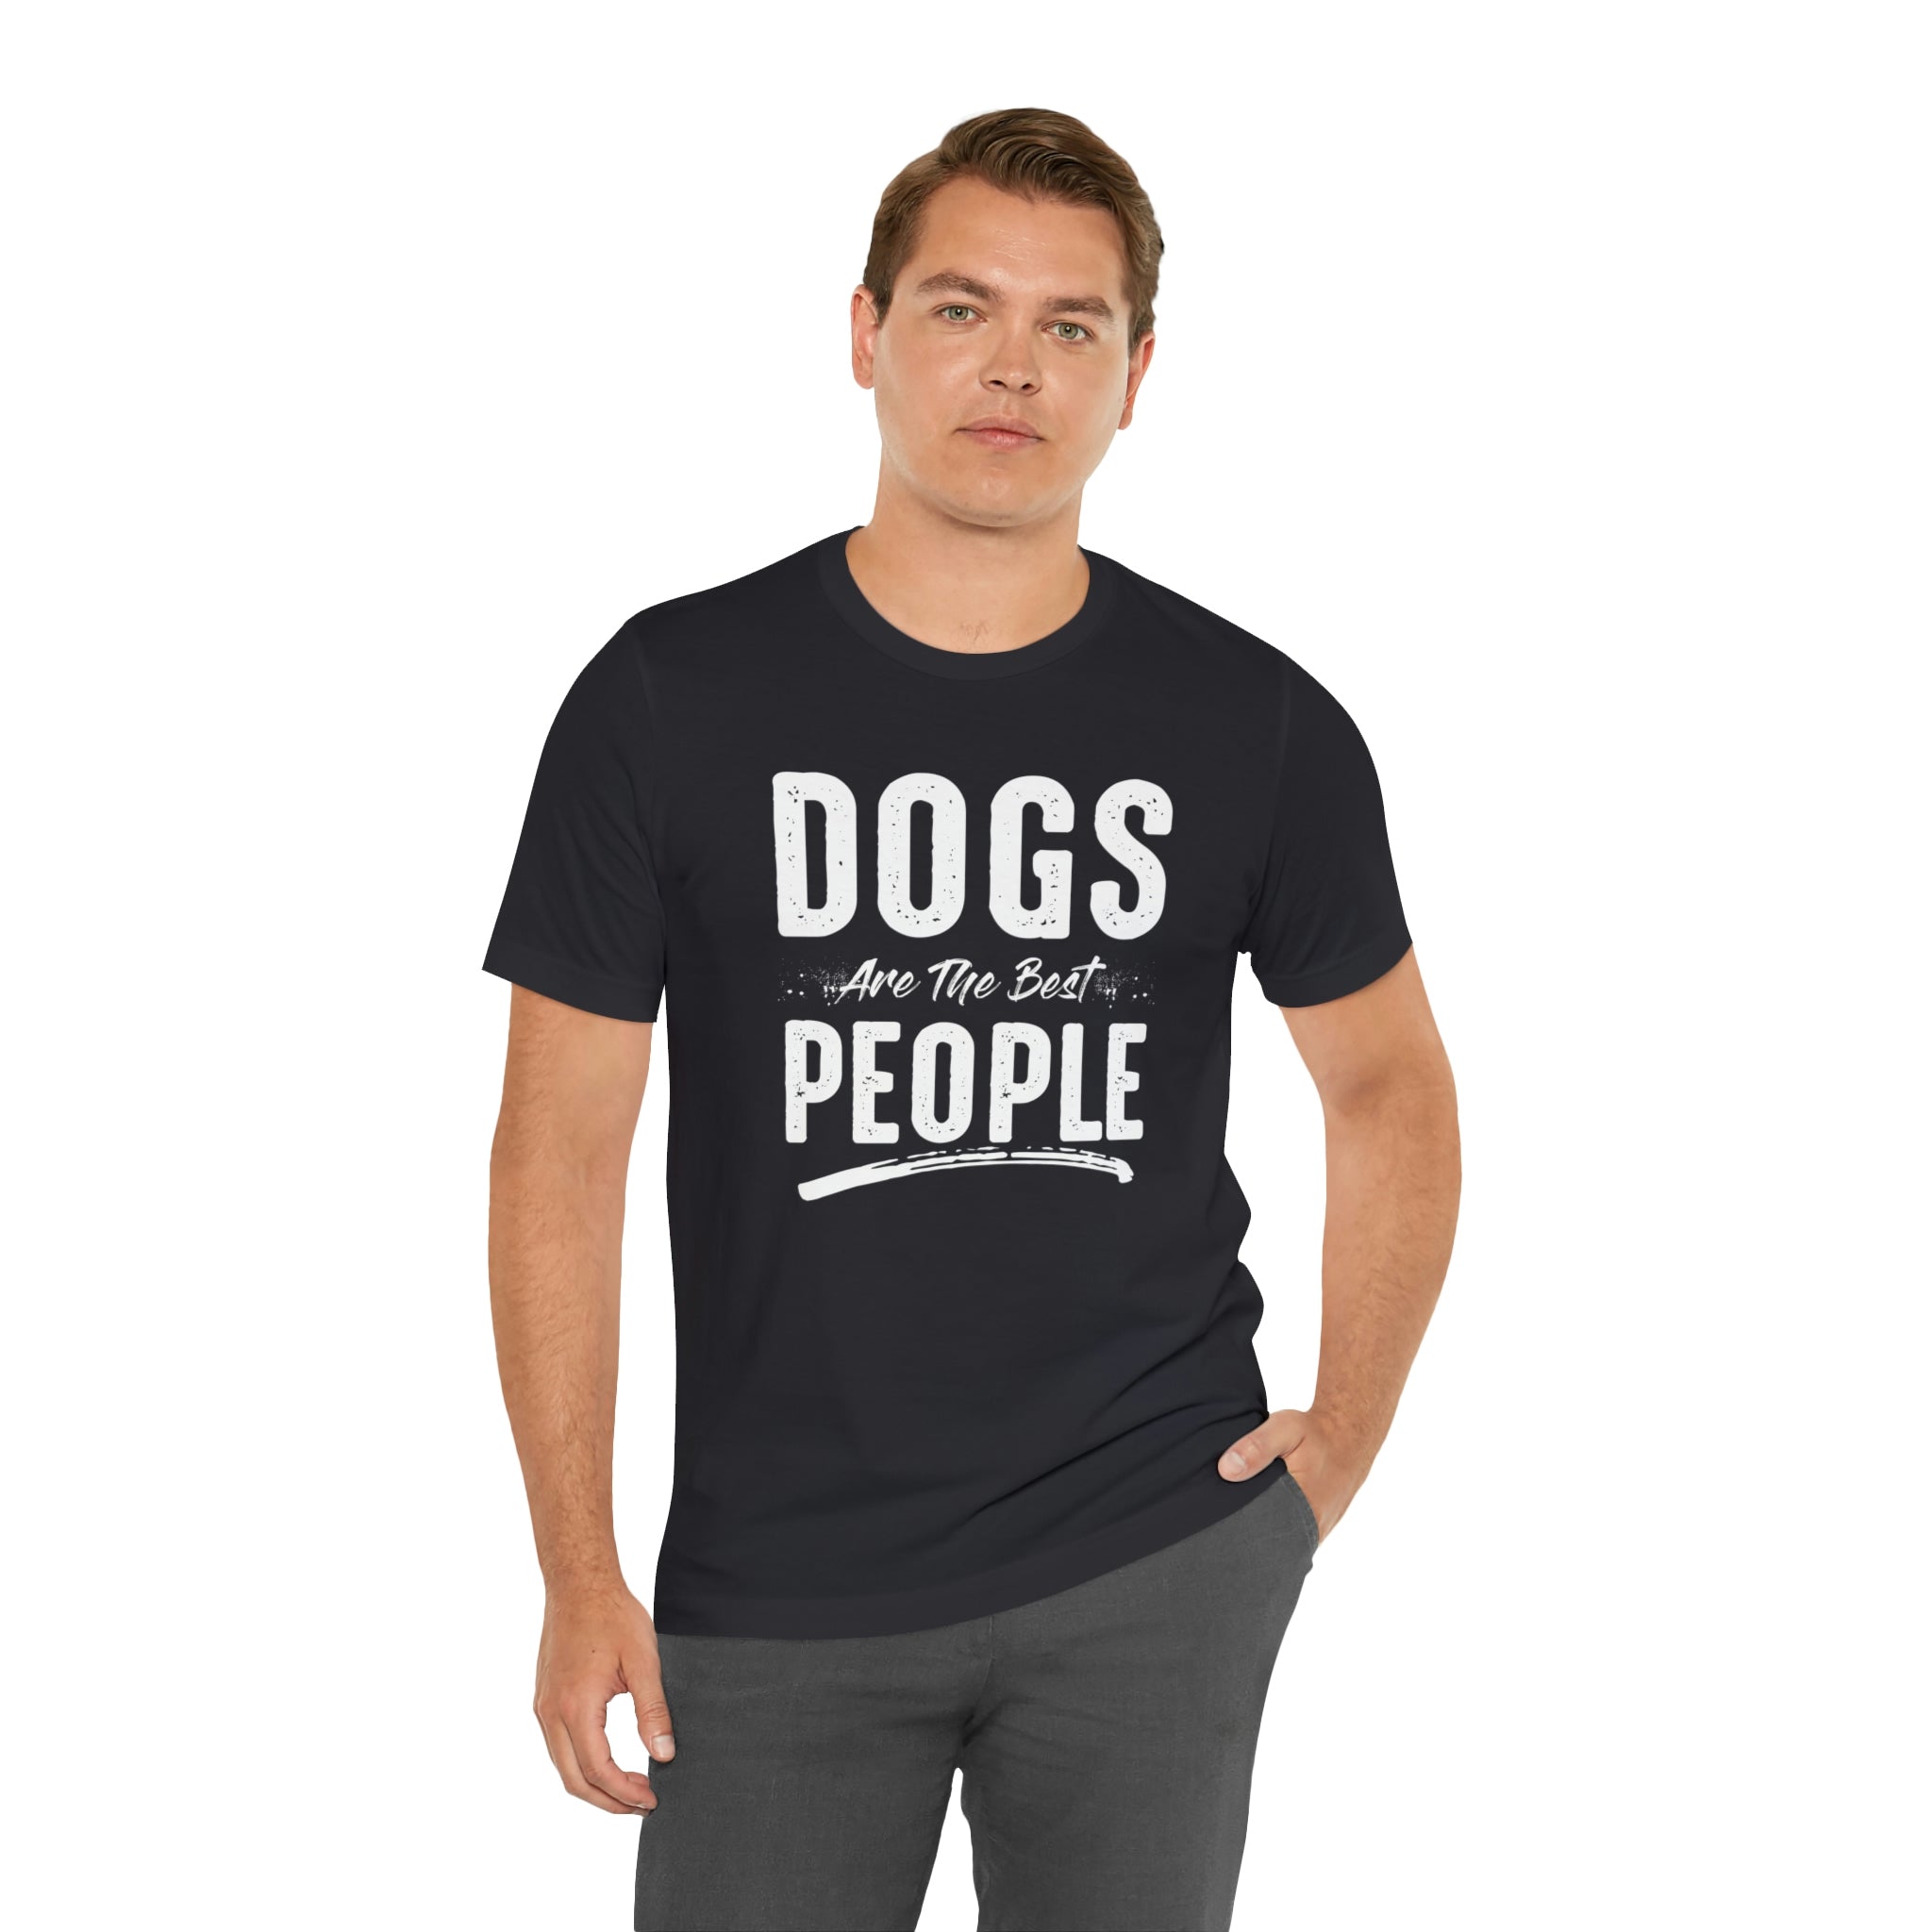 Dogs Are The Best People - Unisex Jersey Short Sleeve Tee